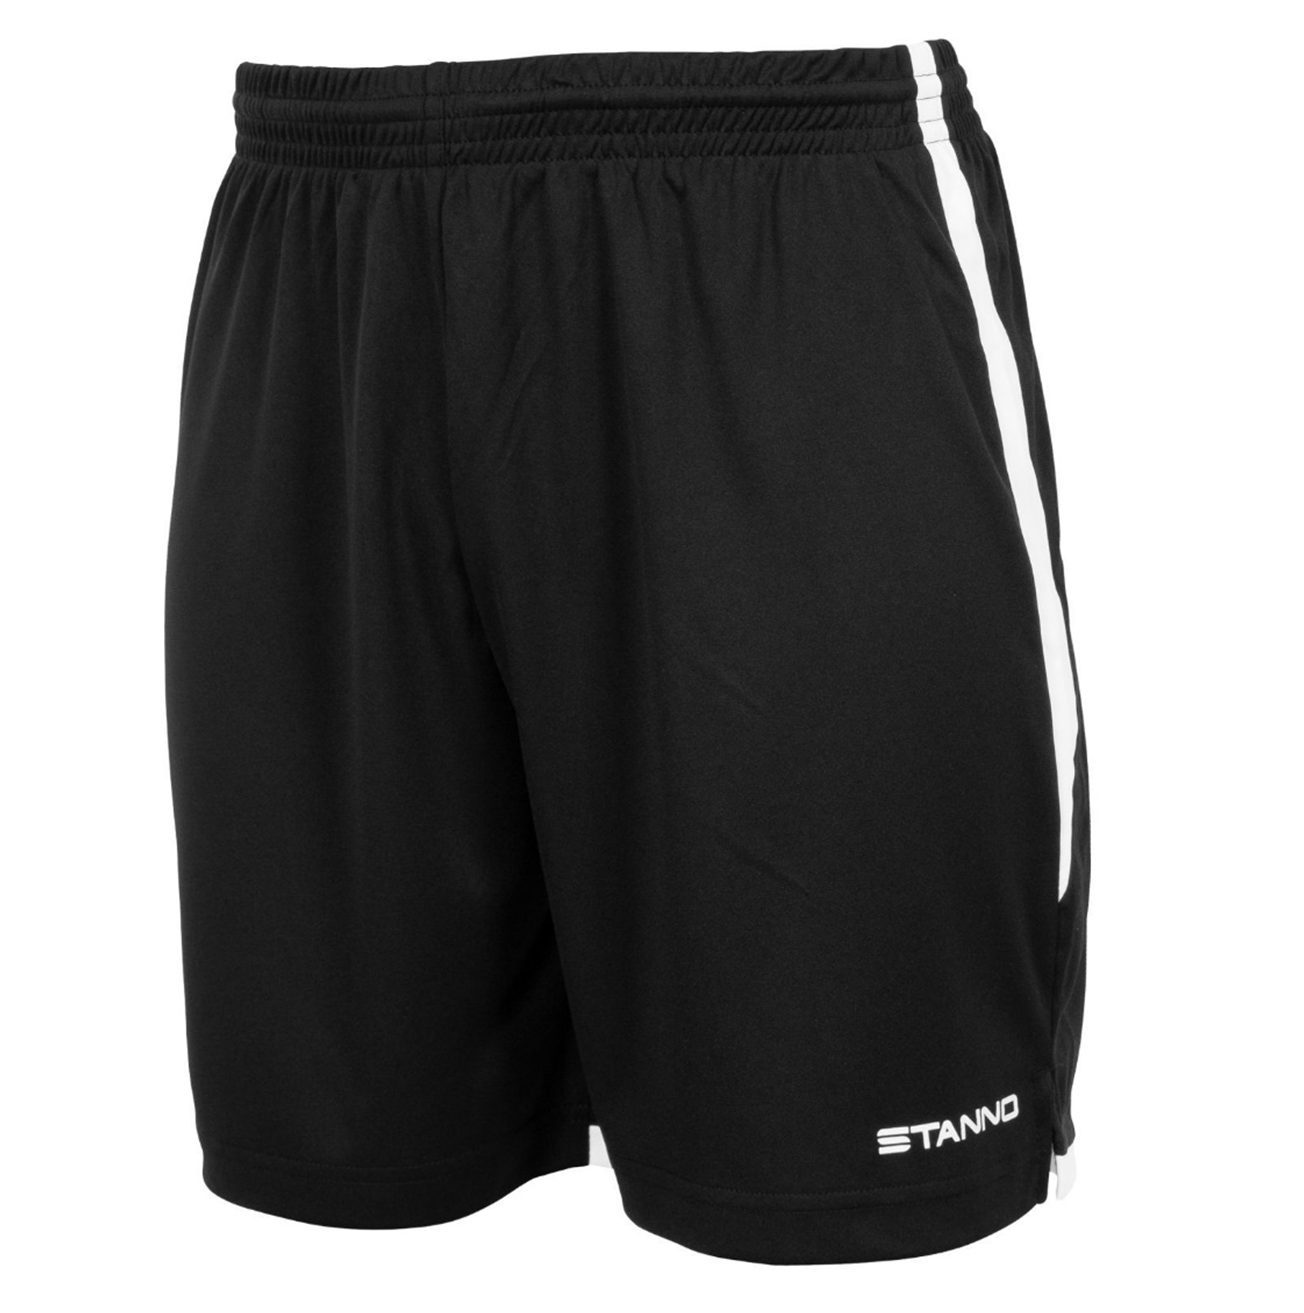 Playmakers FC Stanno Focus Short